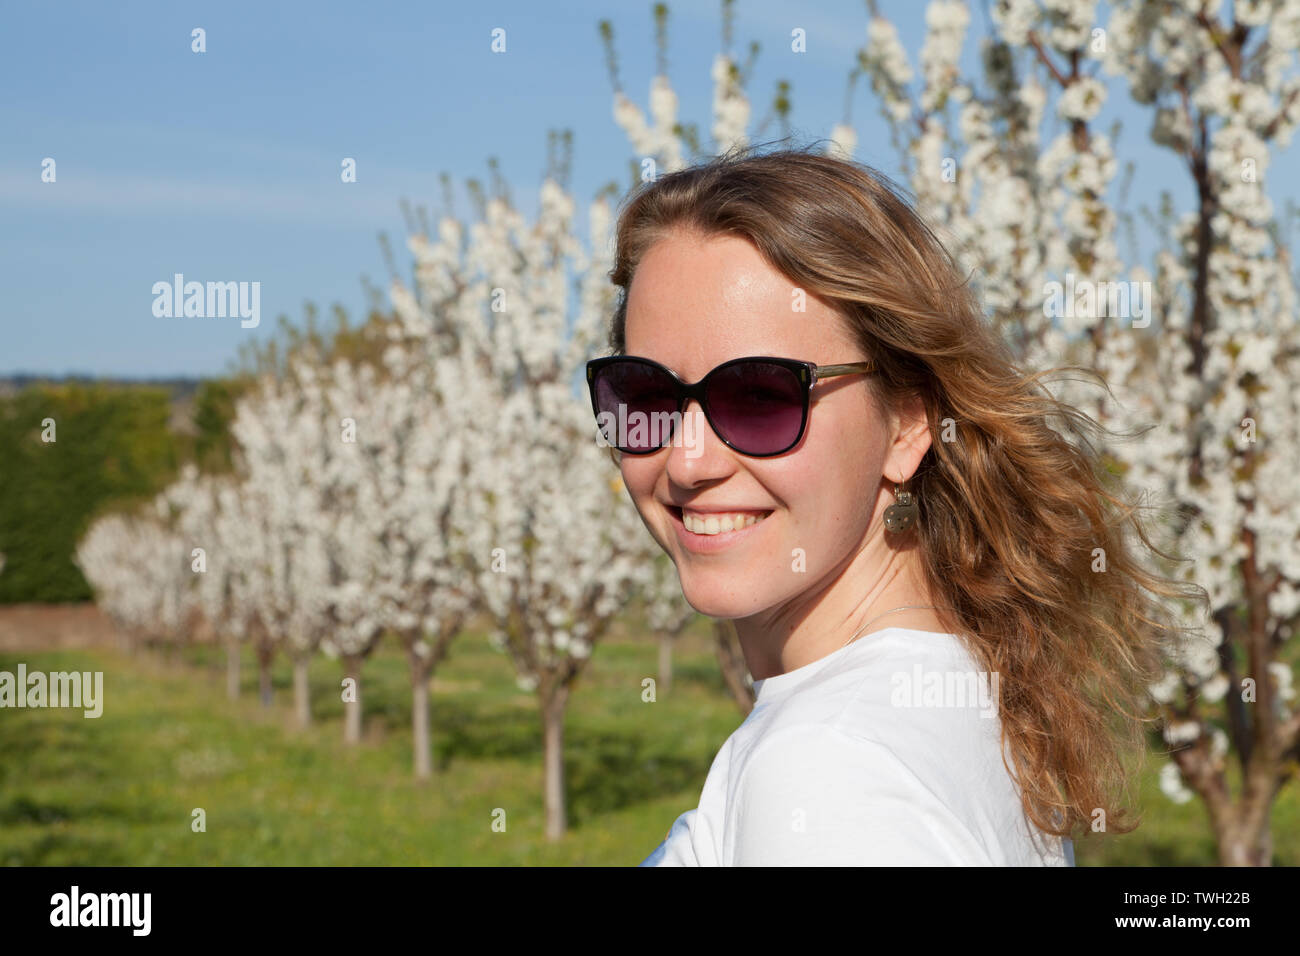 Young woman in sunglasses on a field with blooming almond trees. France. Stock Photo